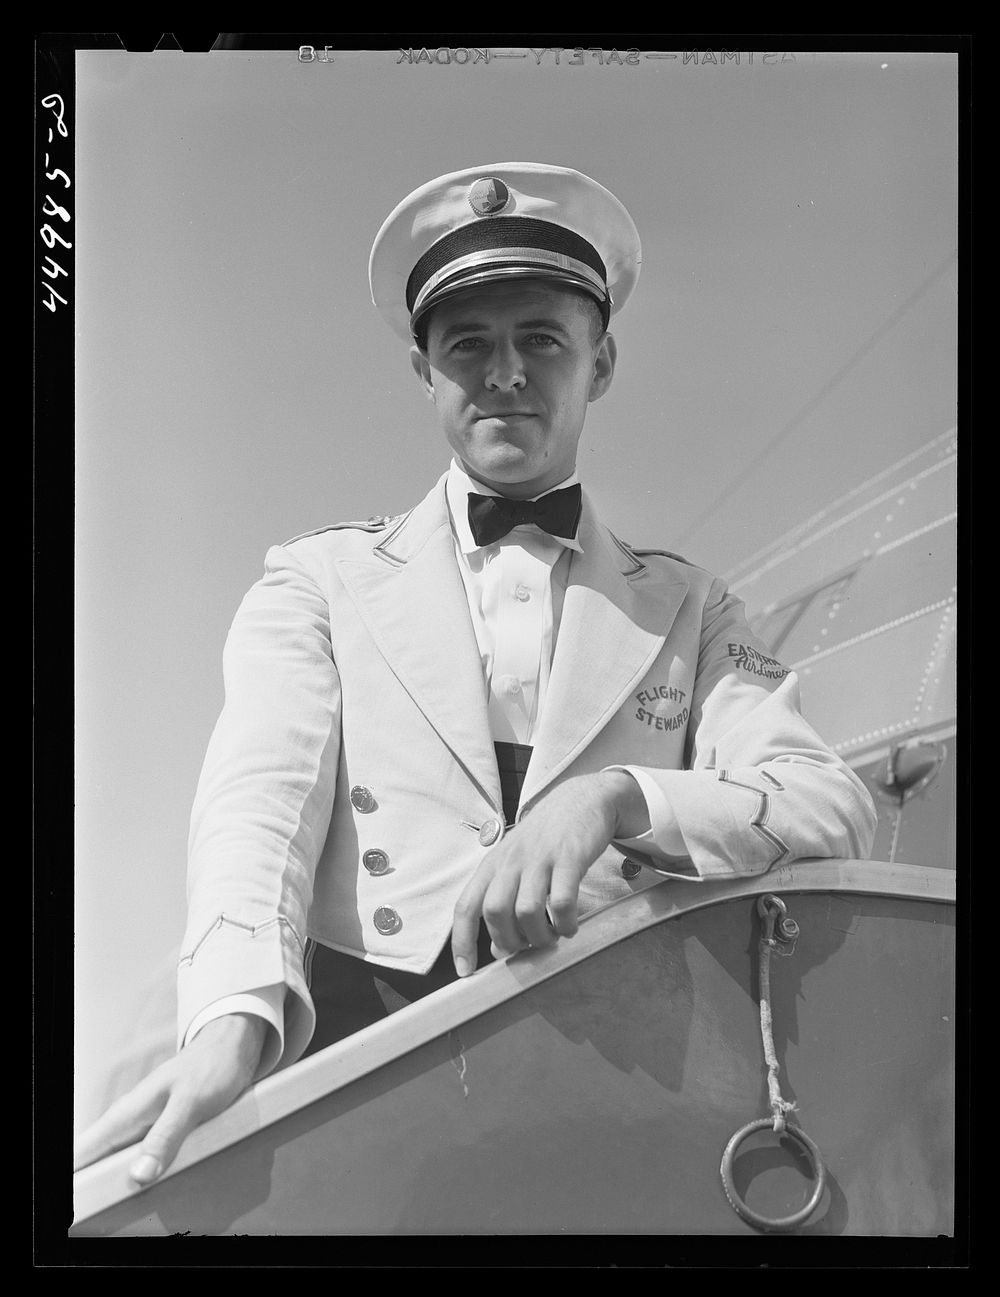 A steward. Washington D.C. municipal airport. Sourced from the Library of Congress.